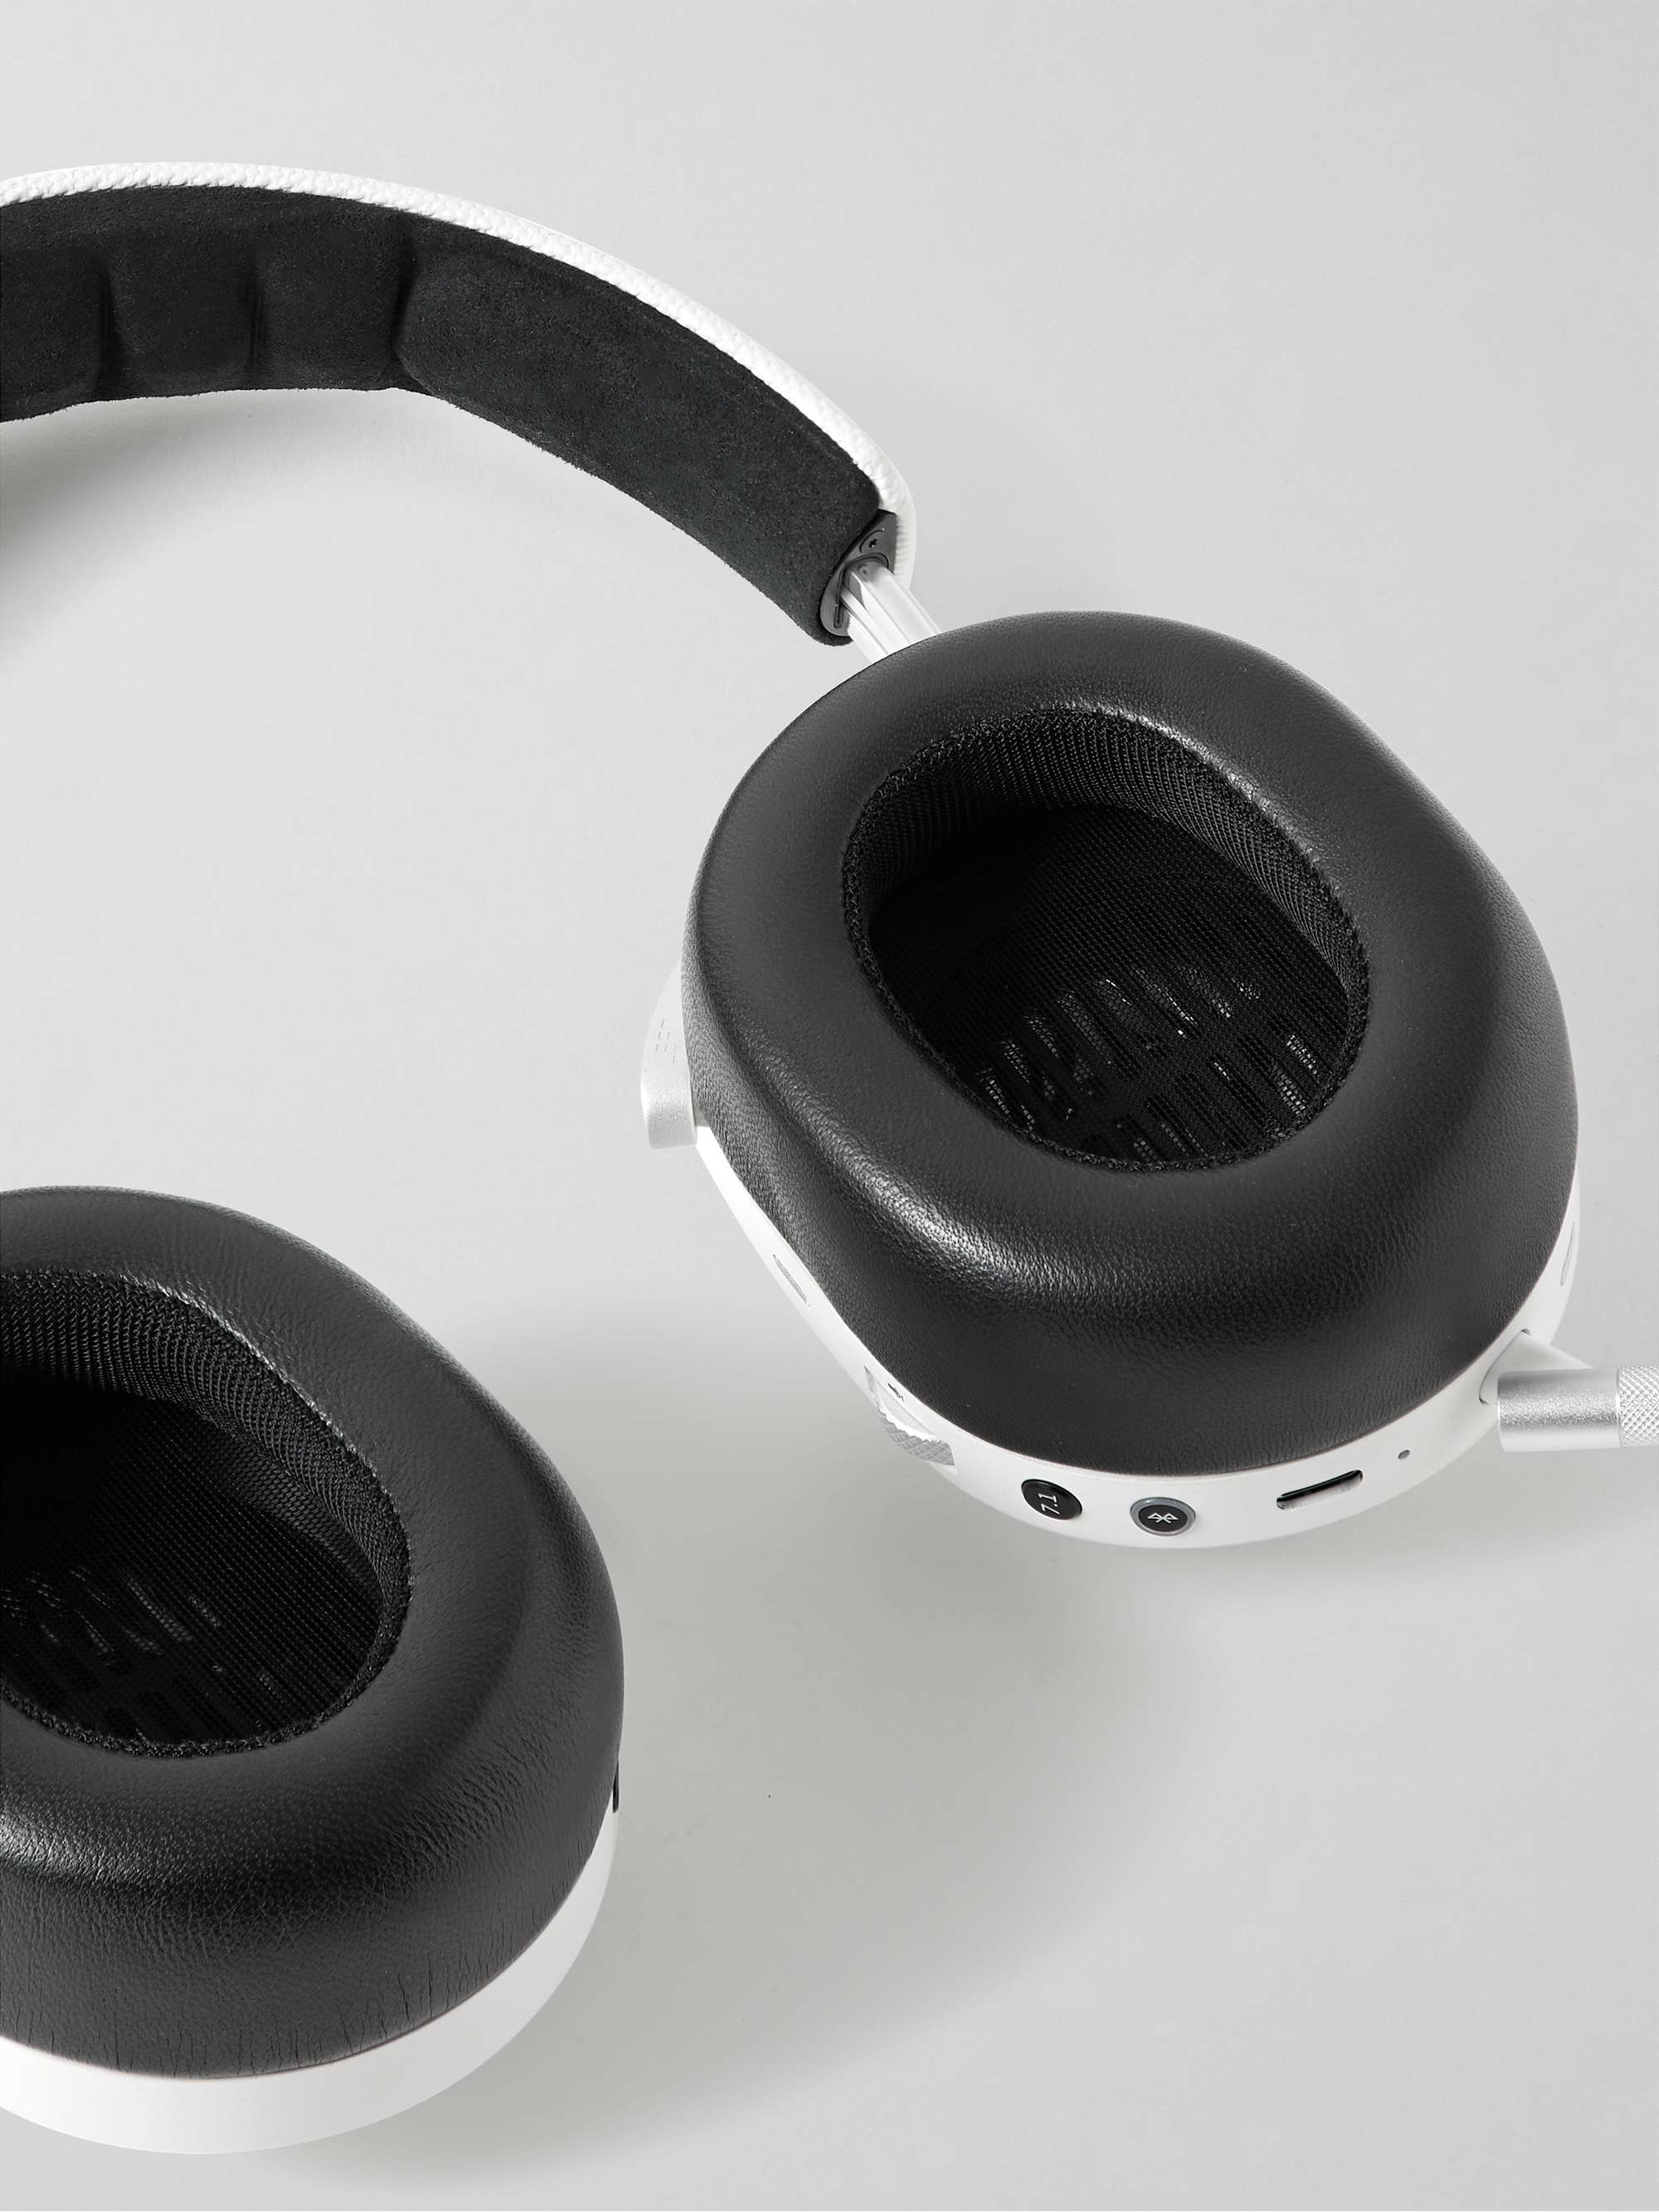 MASTER & DYNAMIC MG20 Wireless Leather Over-Ear Gaming Headphones